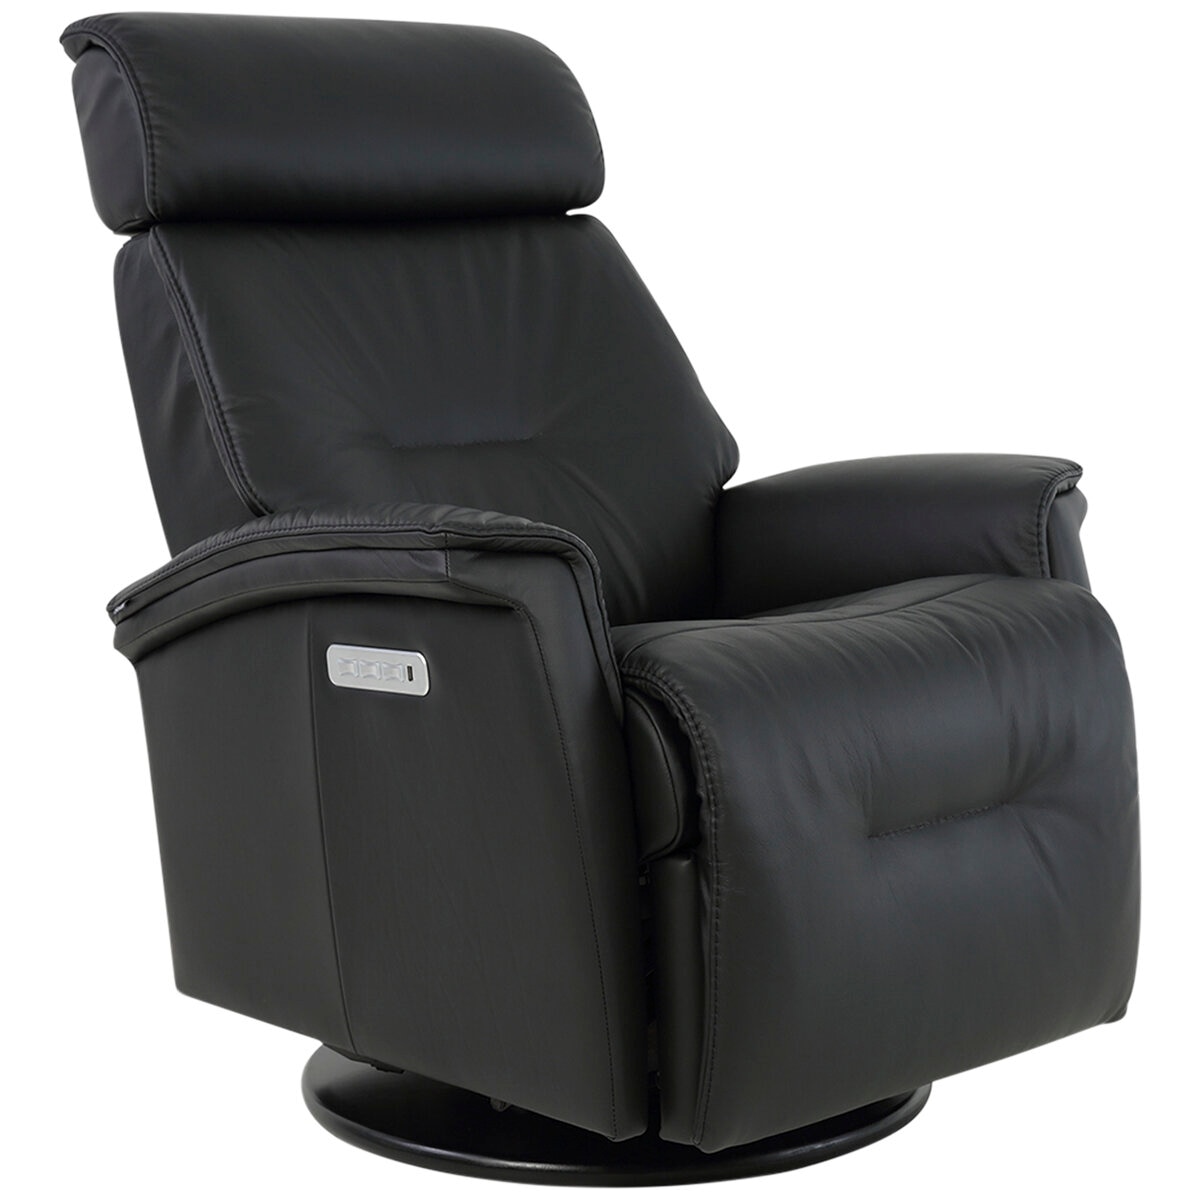 Moran Fjords Rome Motorized Recliner Relaxer Large 3 Motors with Battery